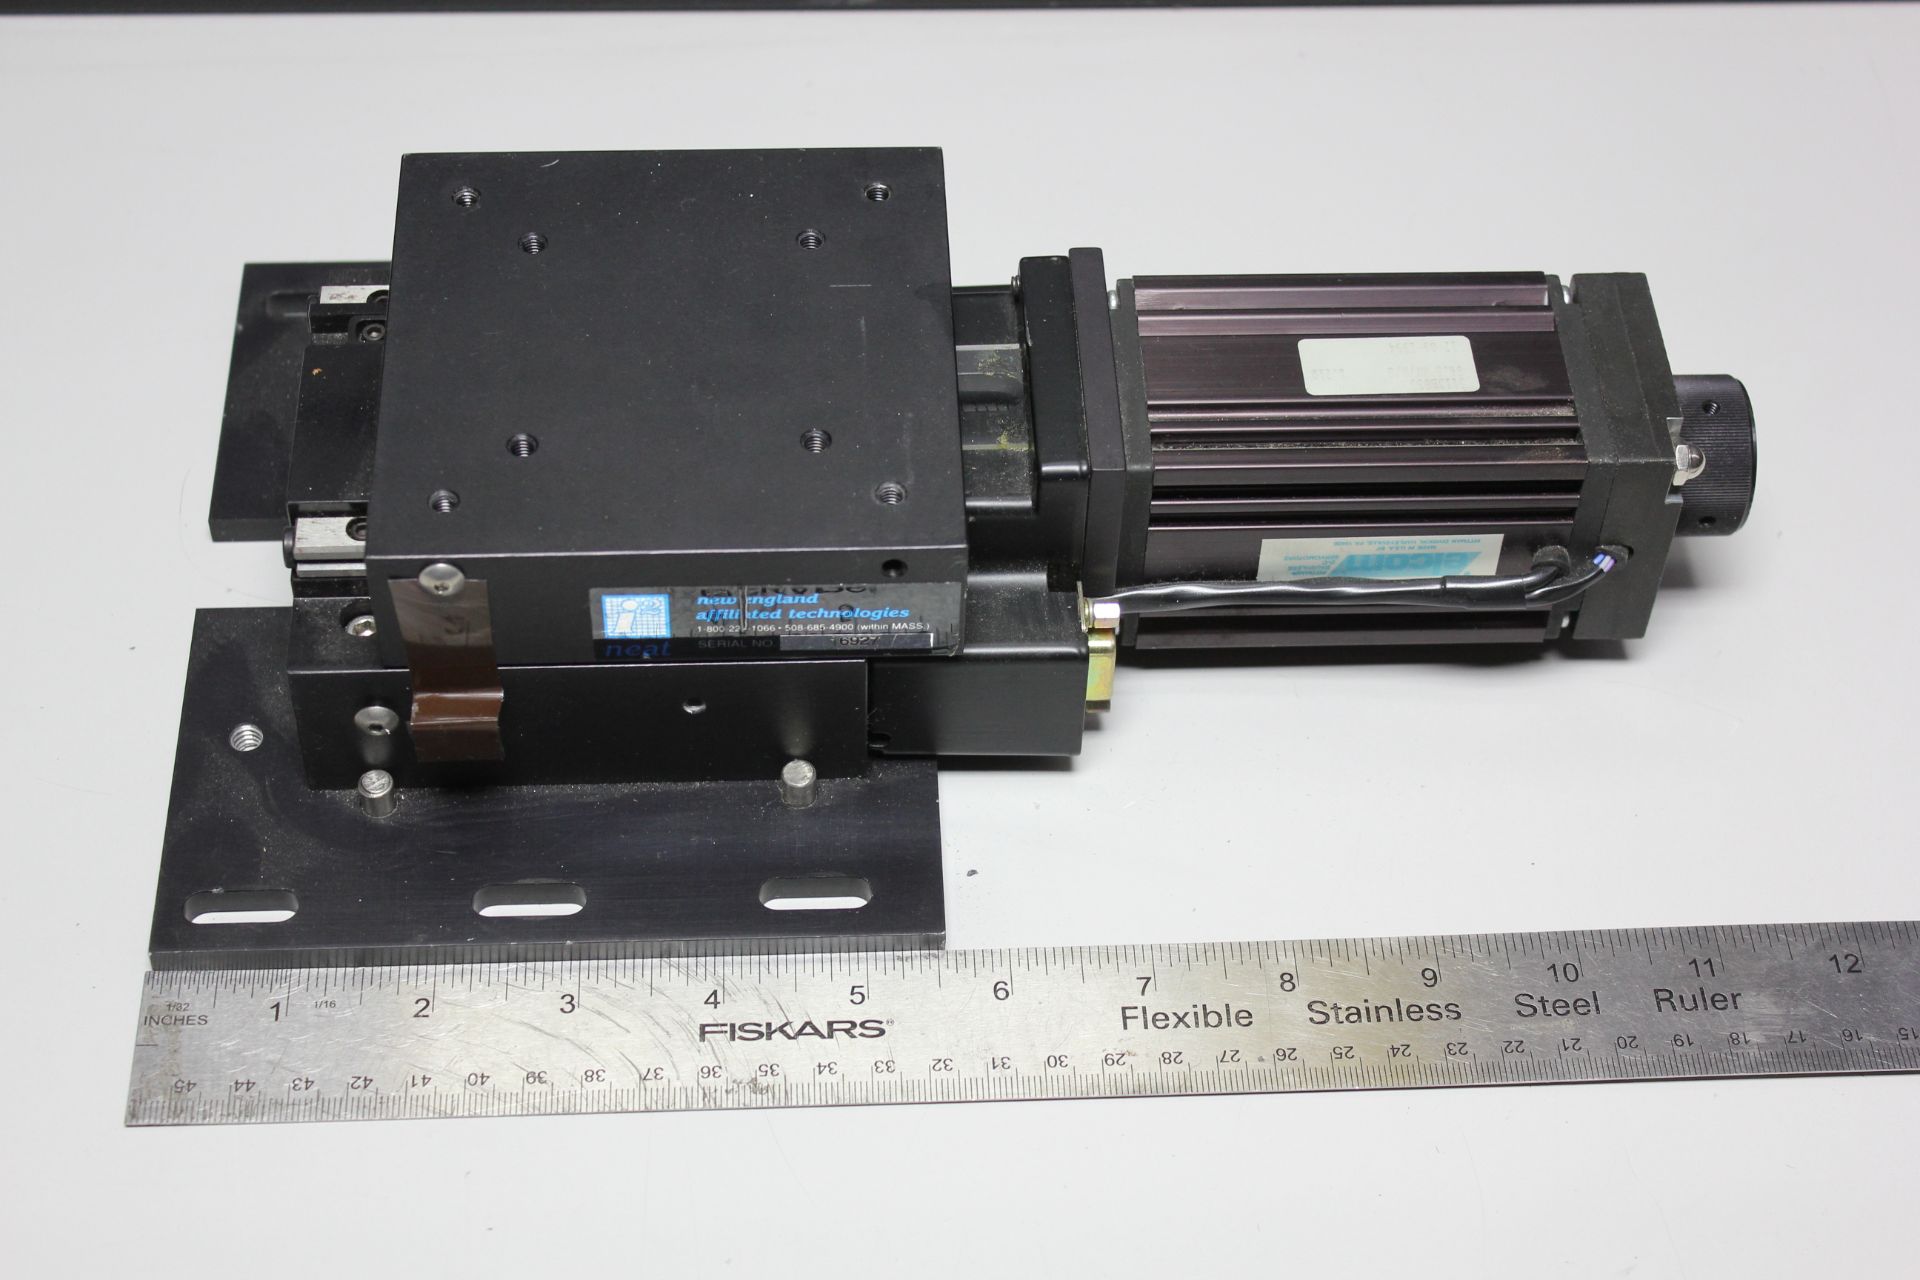 NEAT LINEAR STAGE WITH ELCOM BRUSHLESS SERVO MOTOR